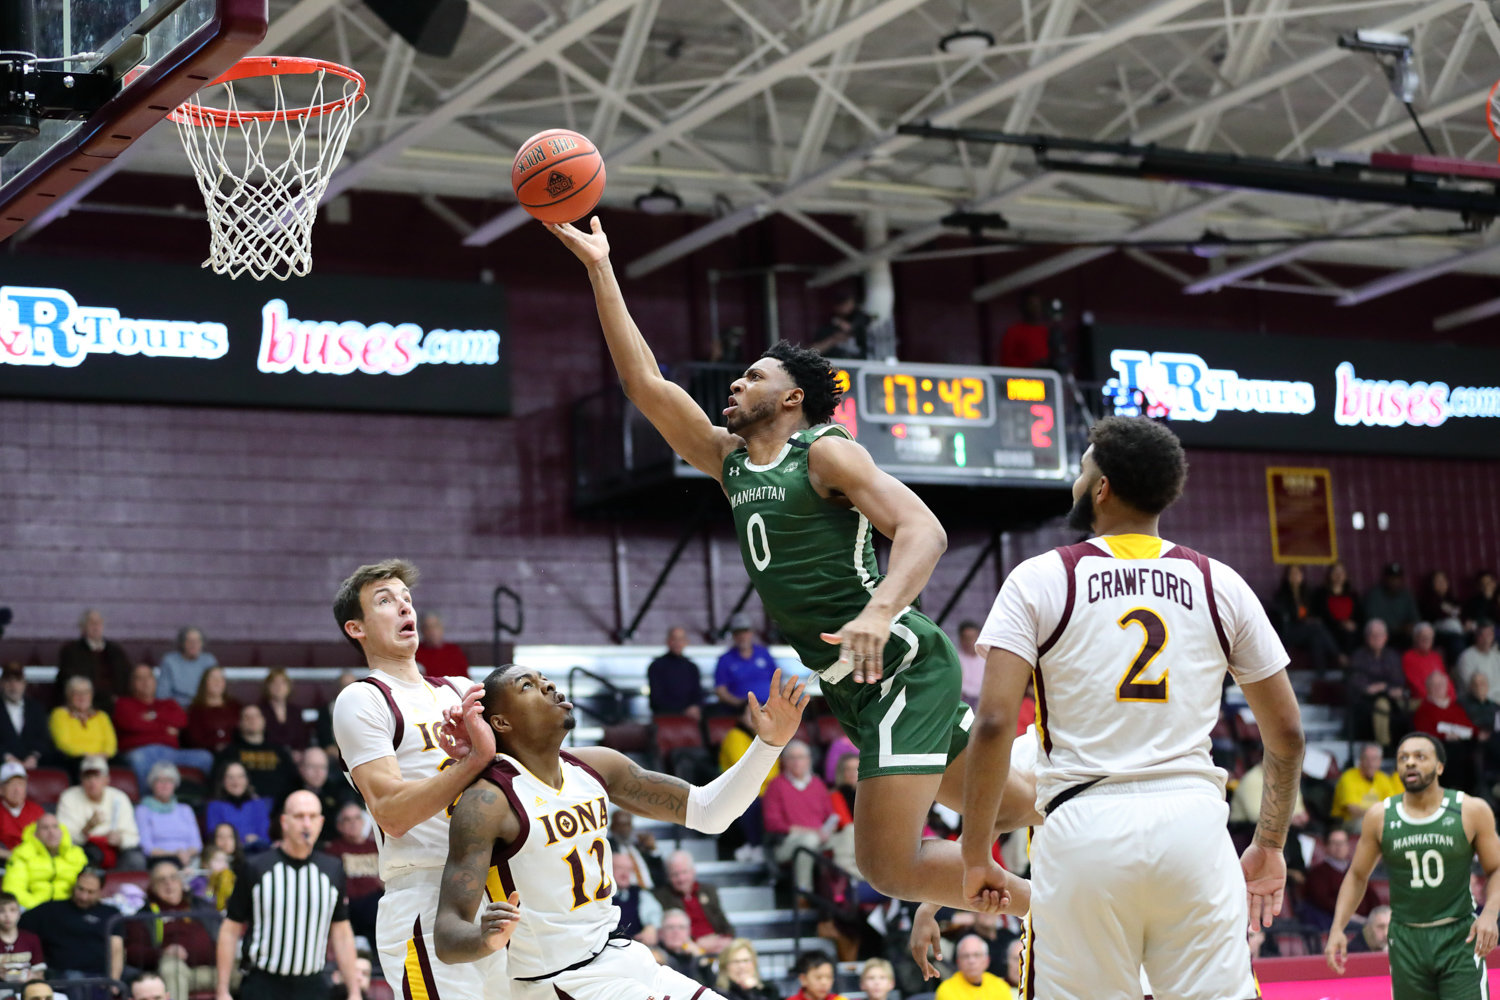 Sophomore Warren Williams led the Jaspers with 13 points, but he couldn’t prevent Manhattan from dropping a one-point decision to Canisius last Sunday.